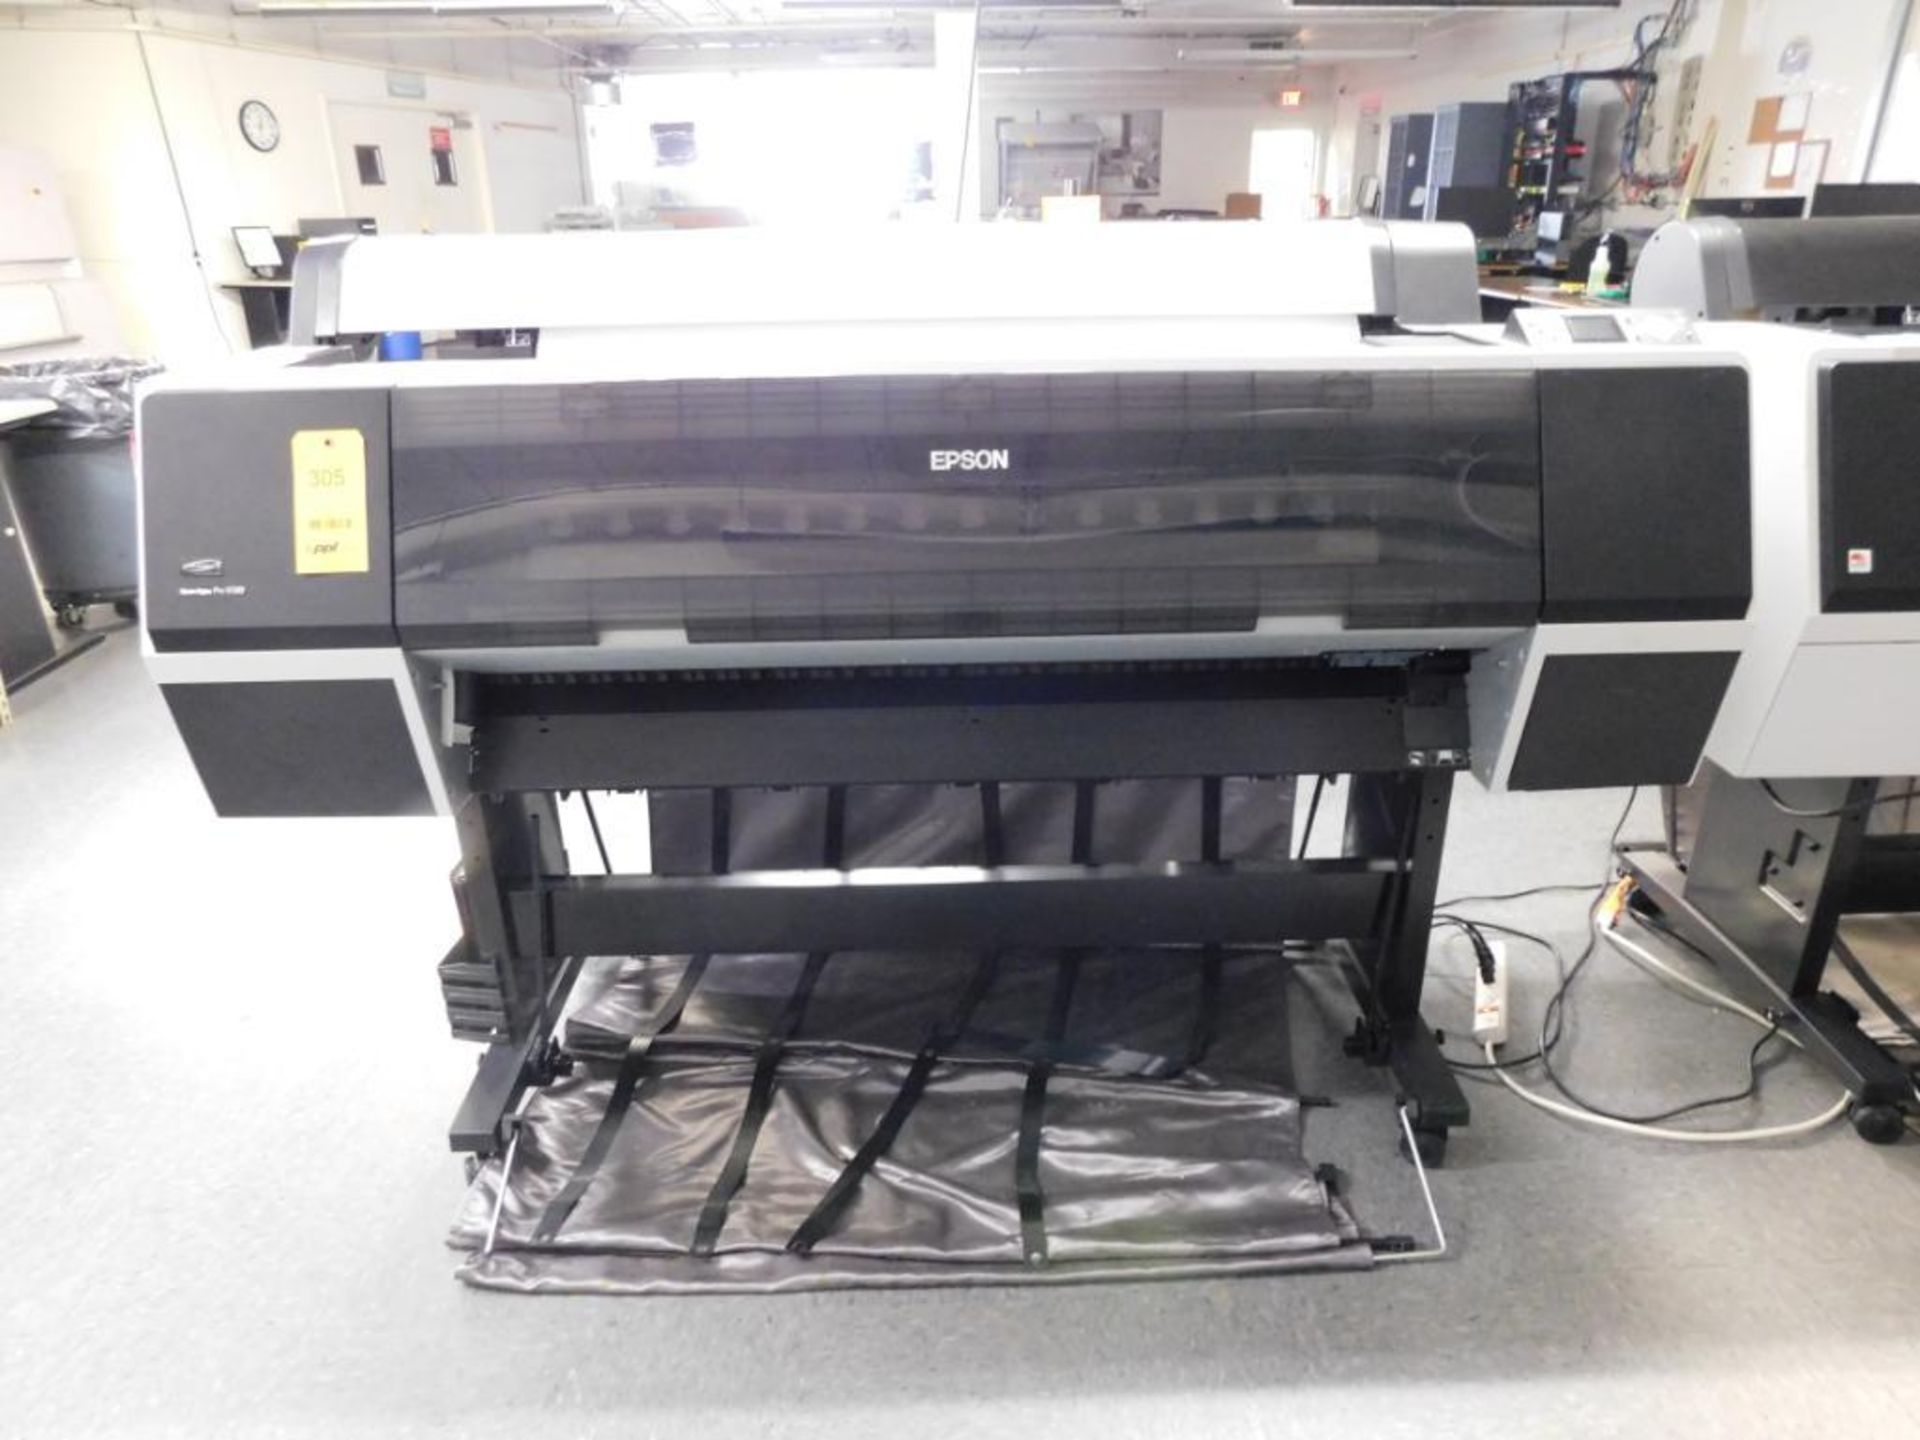 Epson Stylus Pro 9700 Large Format Printer Model K126A, S/N LNDE006620 (LOCATED IN MINNEAPOLIS, MN.) - Image 2 of 5